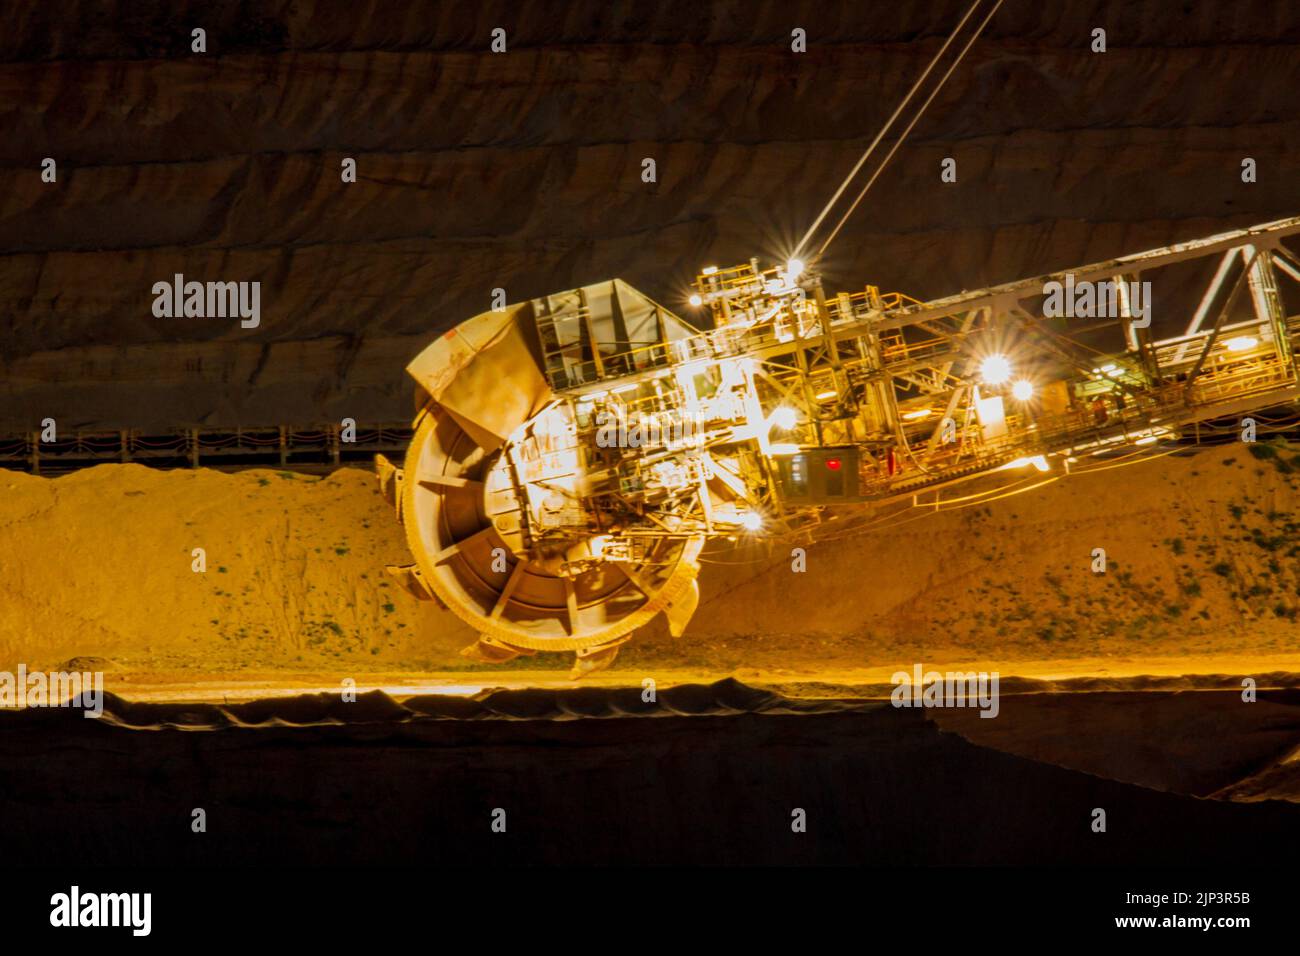 Walking Excavator in a Clay Quarry Stock Image - Image of july, mining:  205843417